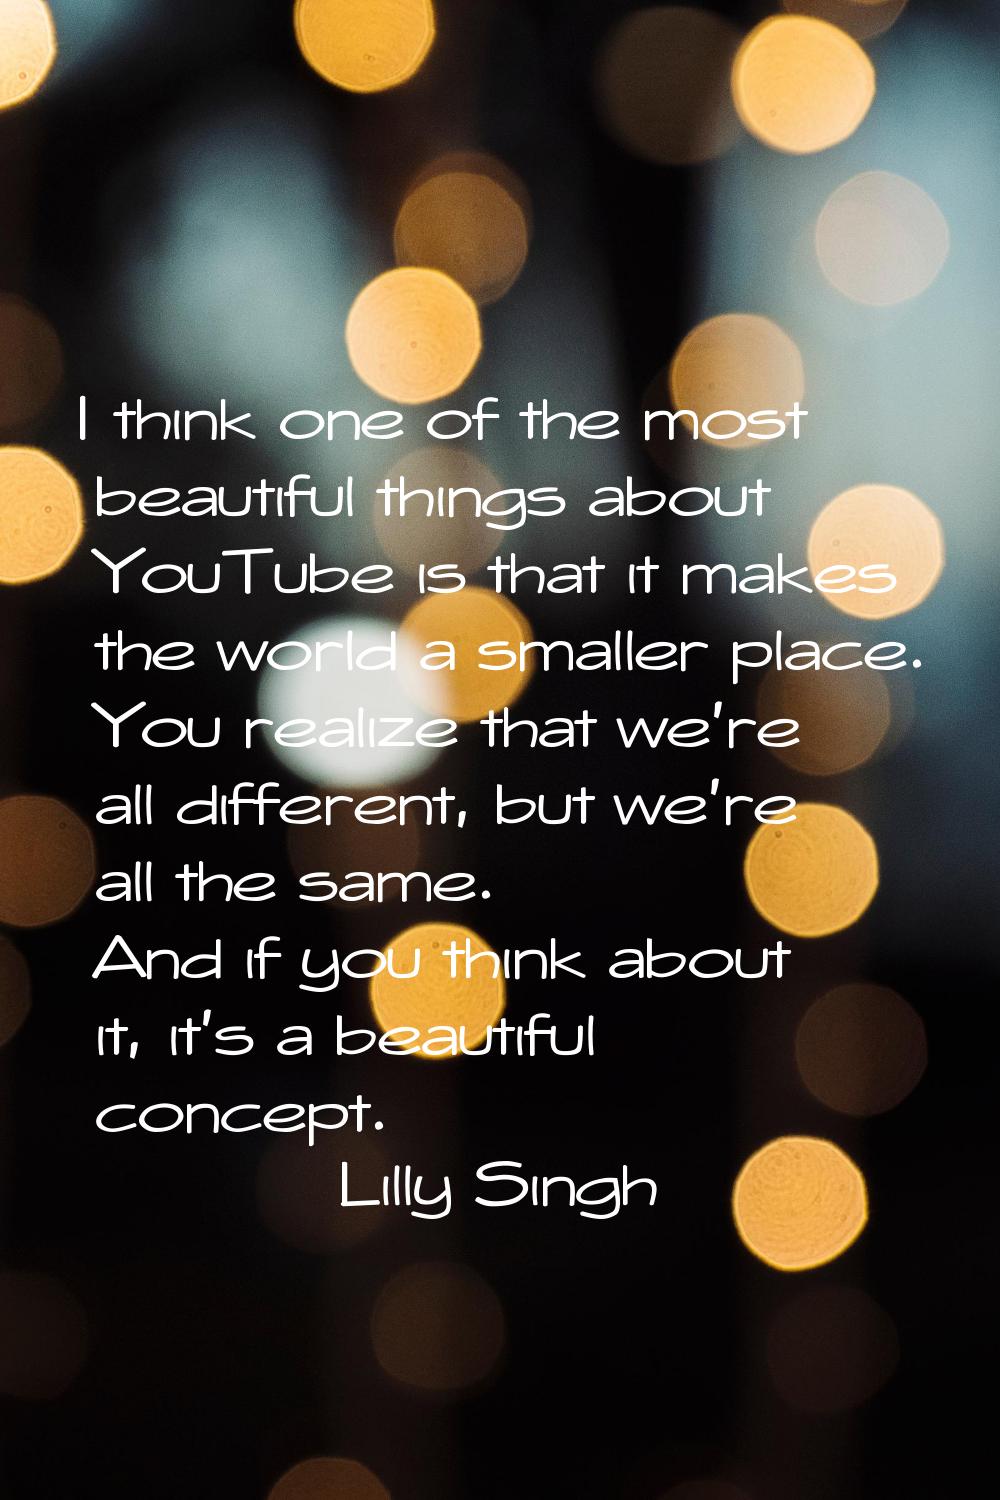 I think one of the most beautiful things about YouTube is that it makes the world a smaller place. 